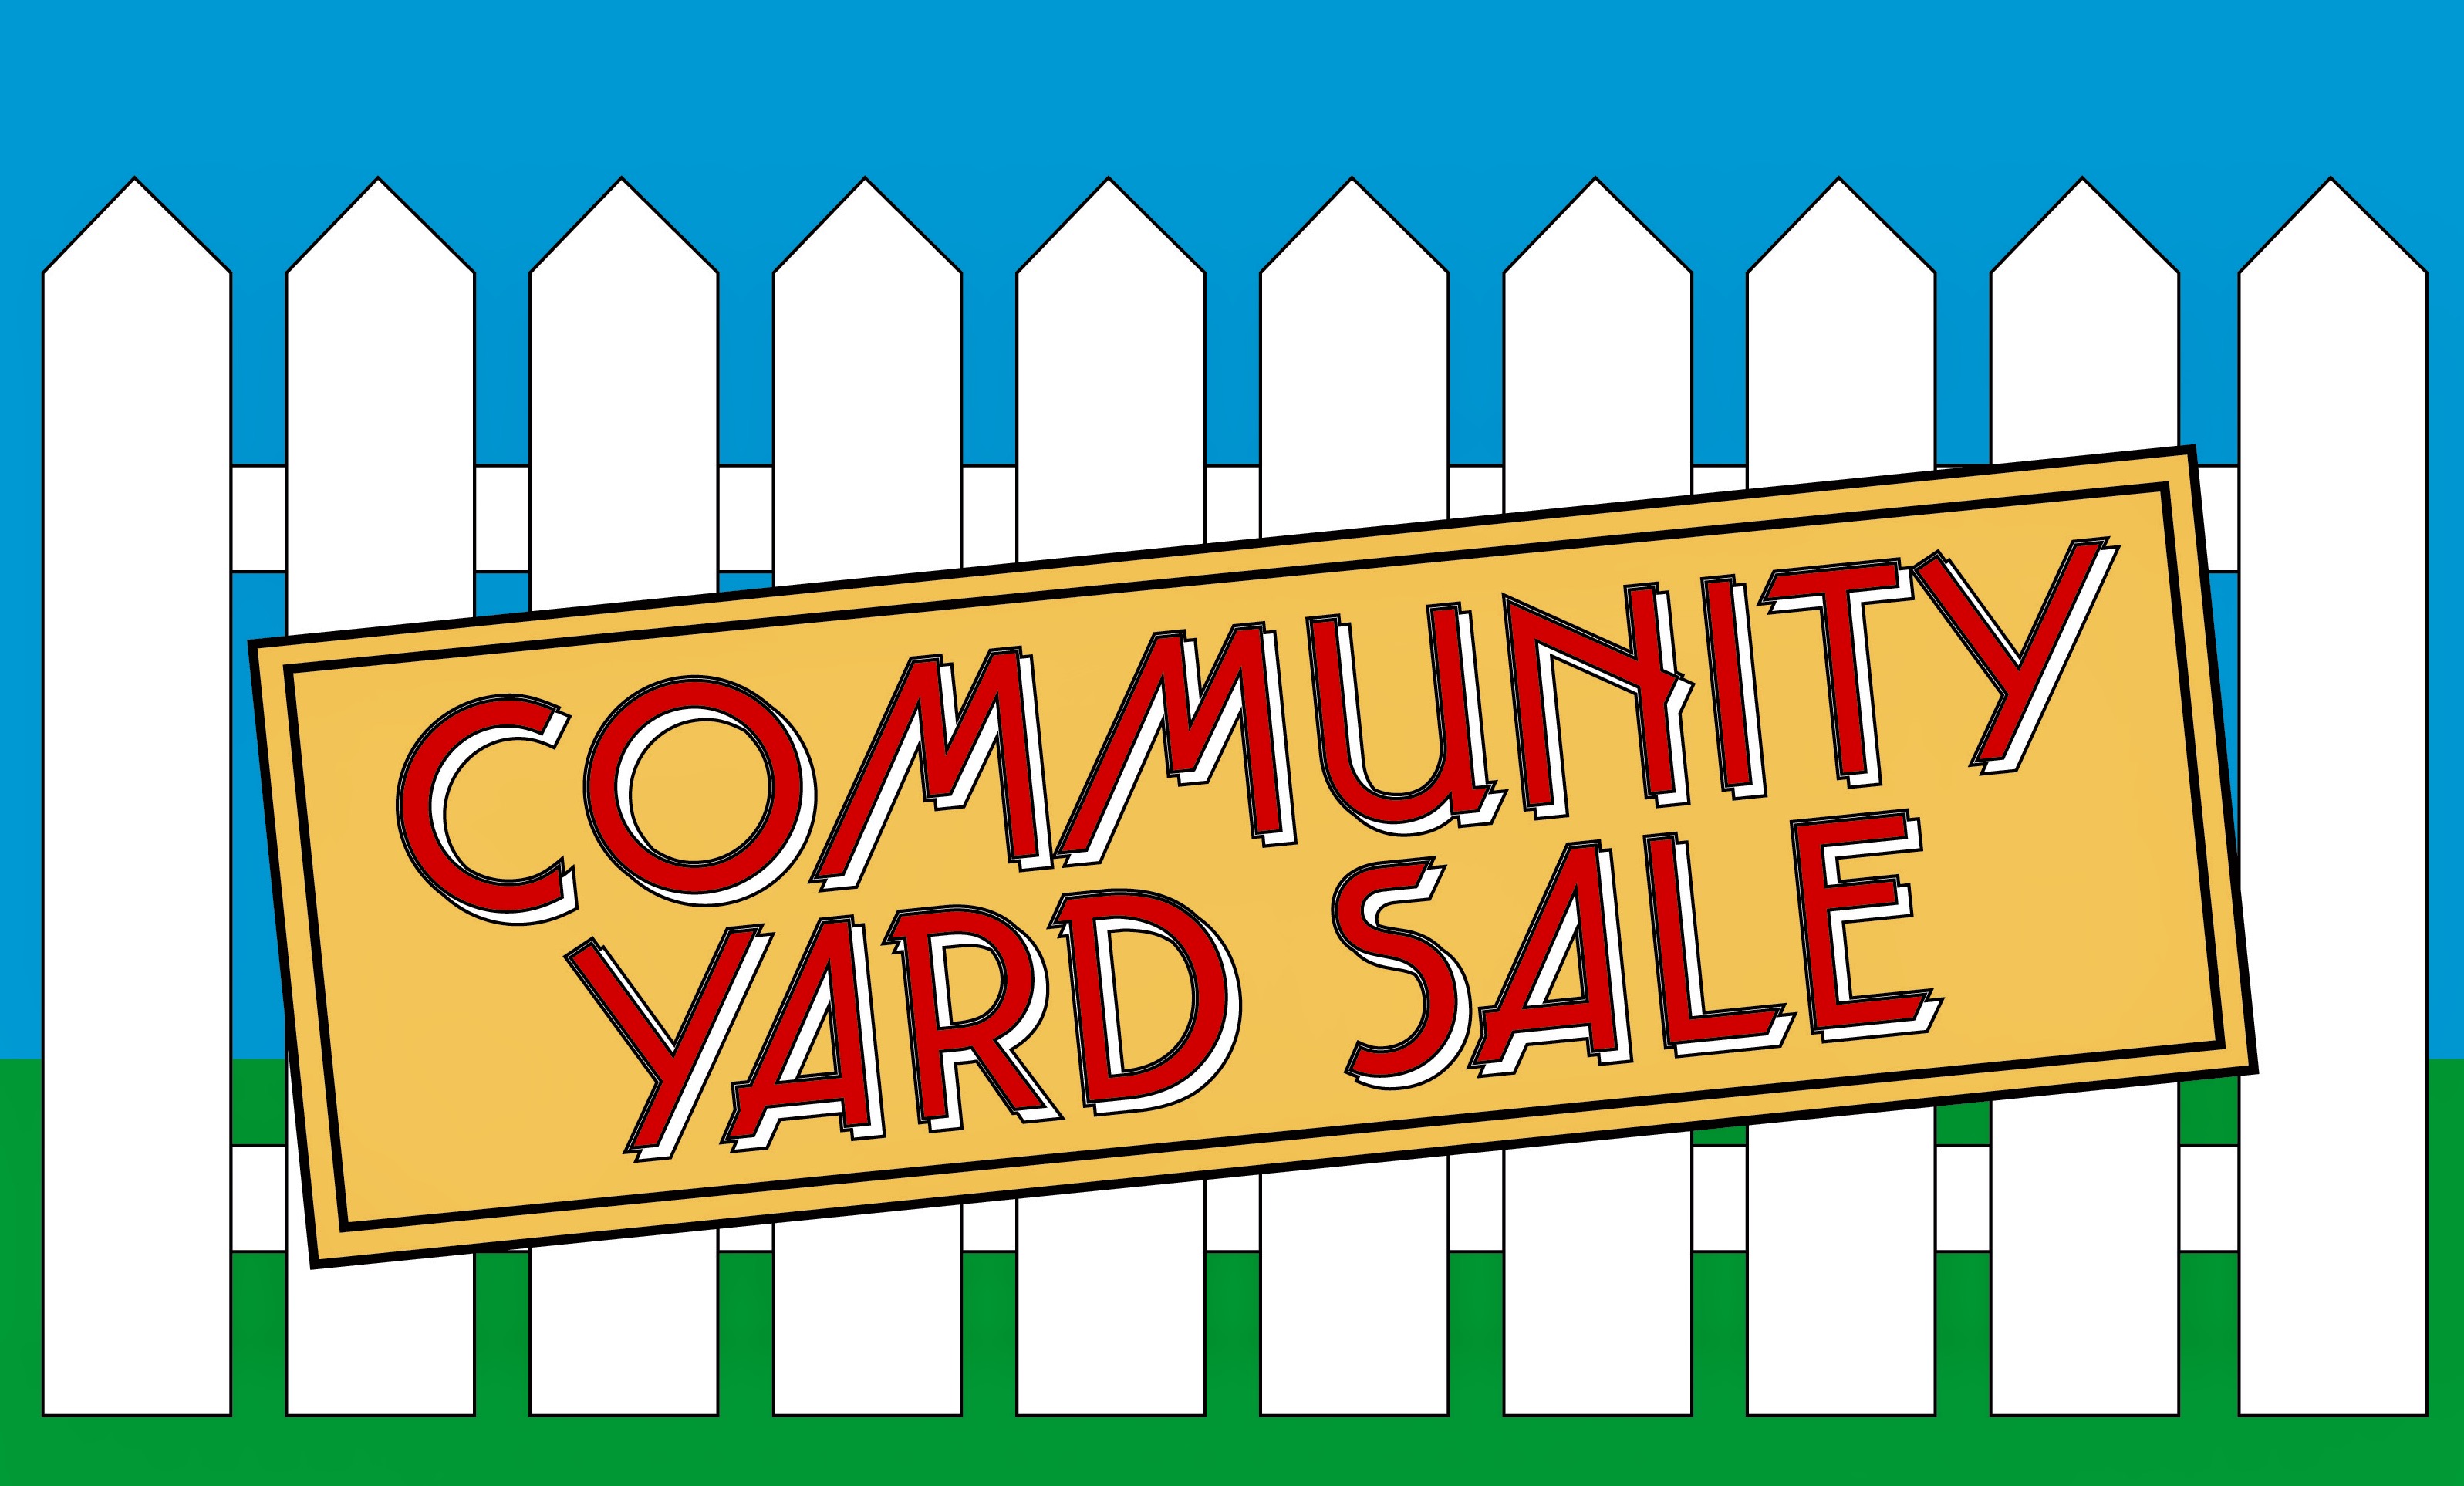 Yard Sale Clipart Community Wide and other clipart images on Cliparts pub â„¢...